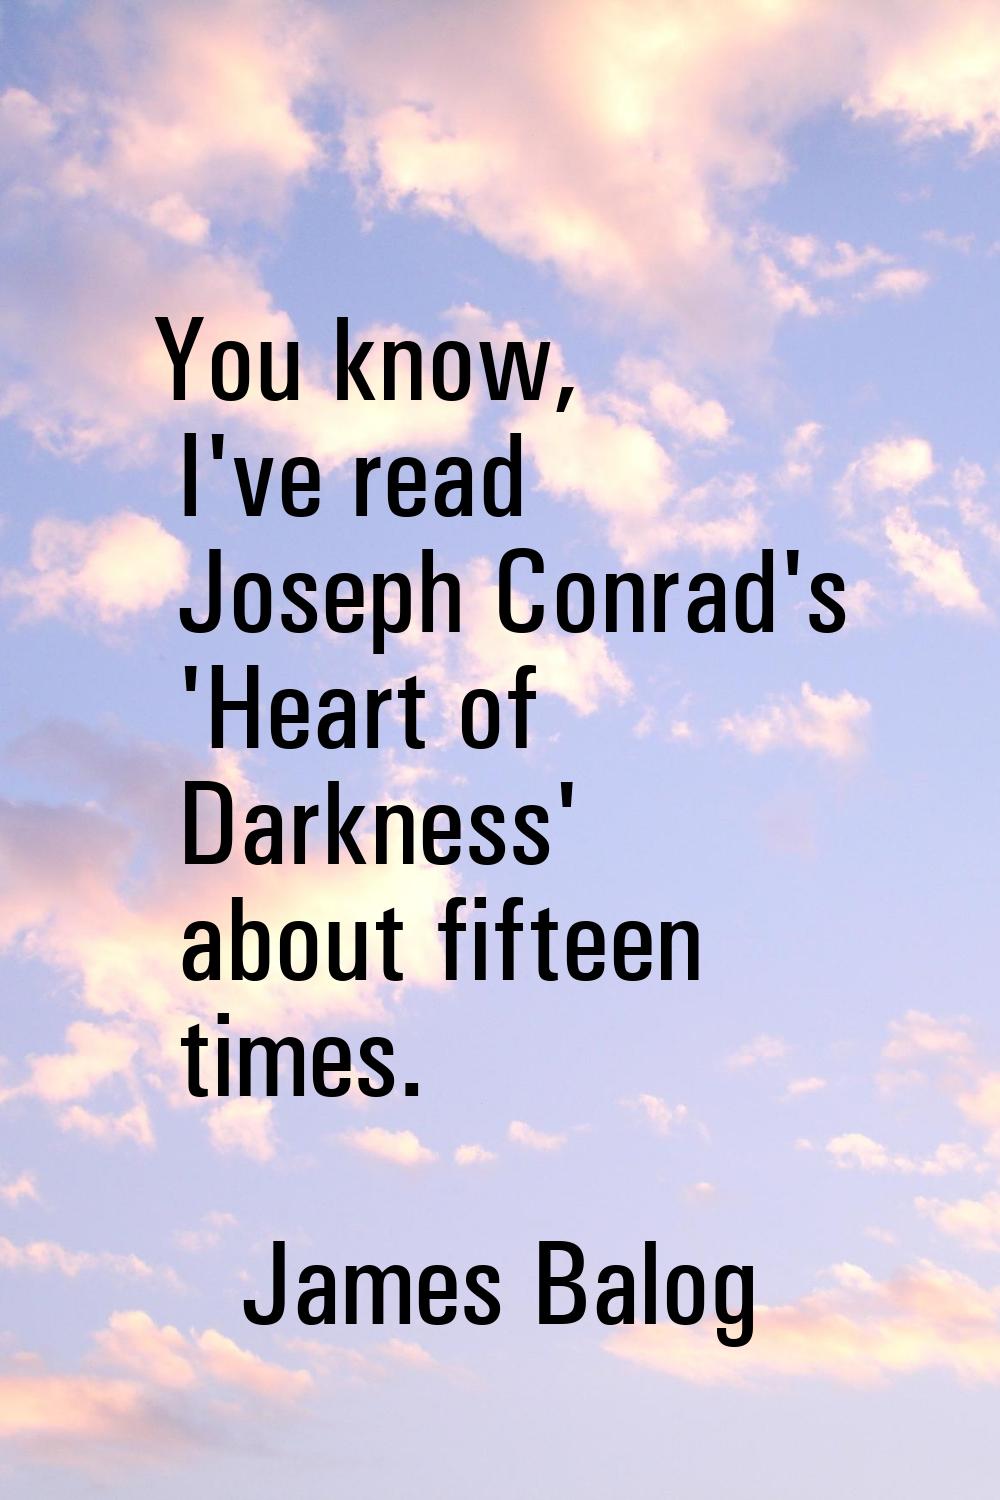 You know, I've read Joseph Conrad's 'Heart of Darkness' about fifteen times.